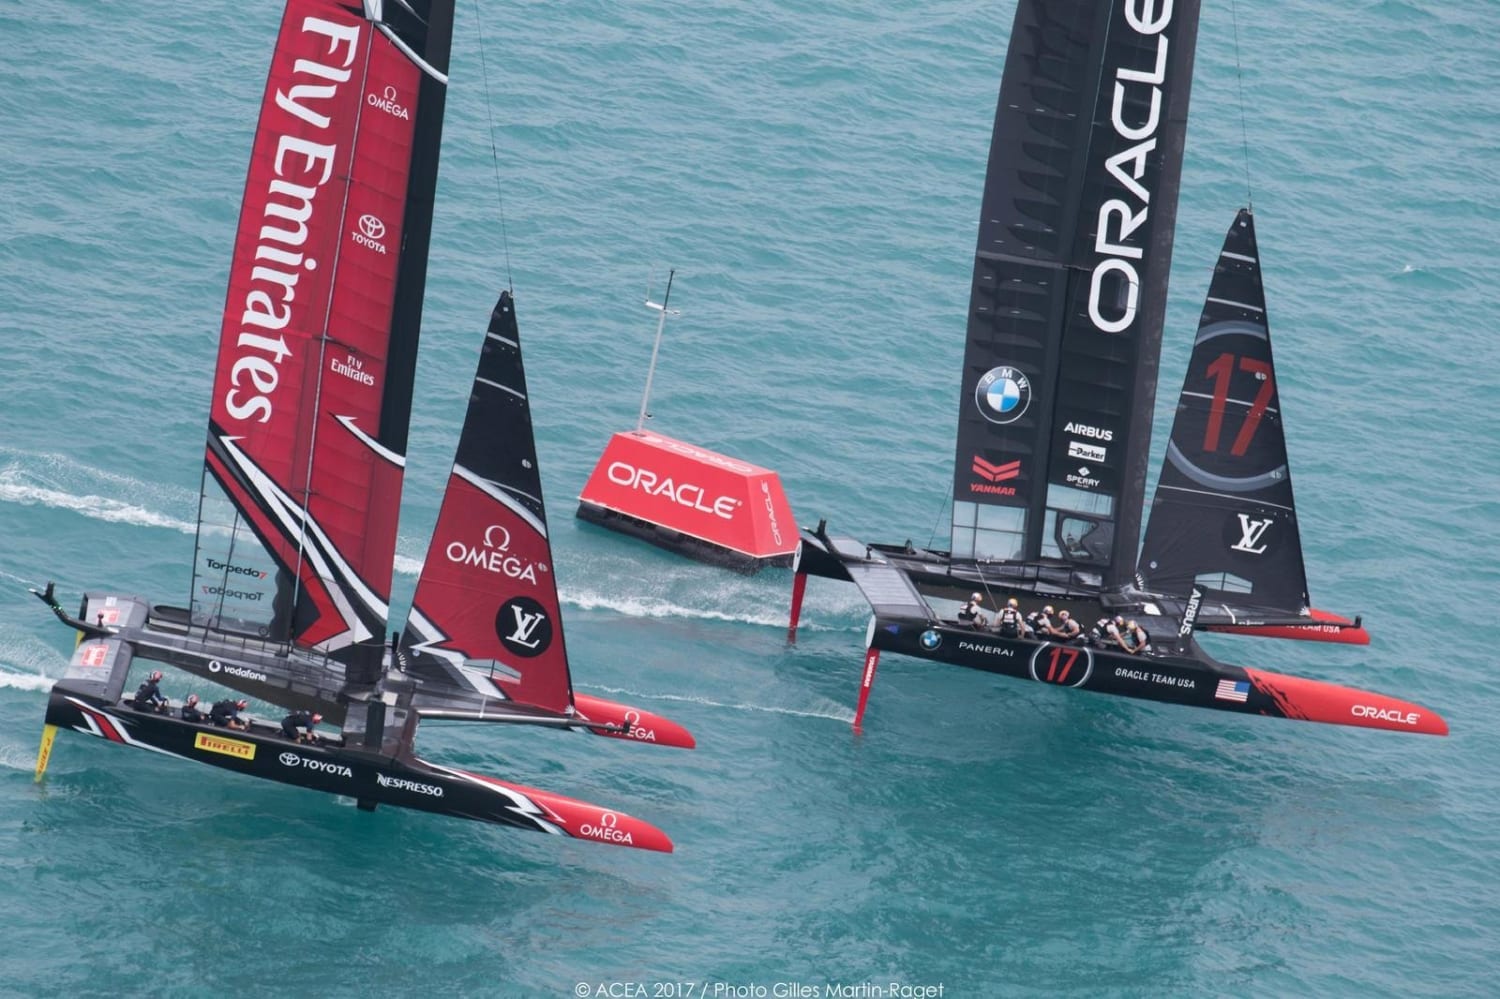 Louis Vuitton becomes Title Partner of the 37th America's Cup